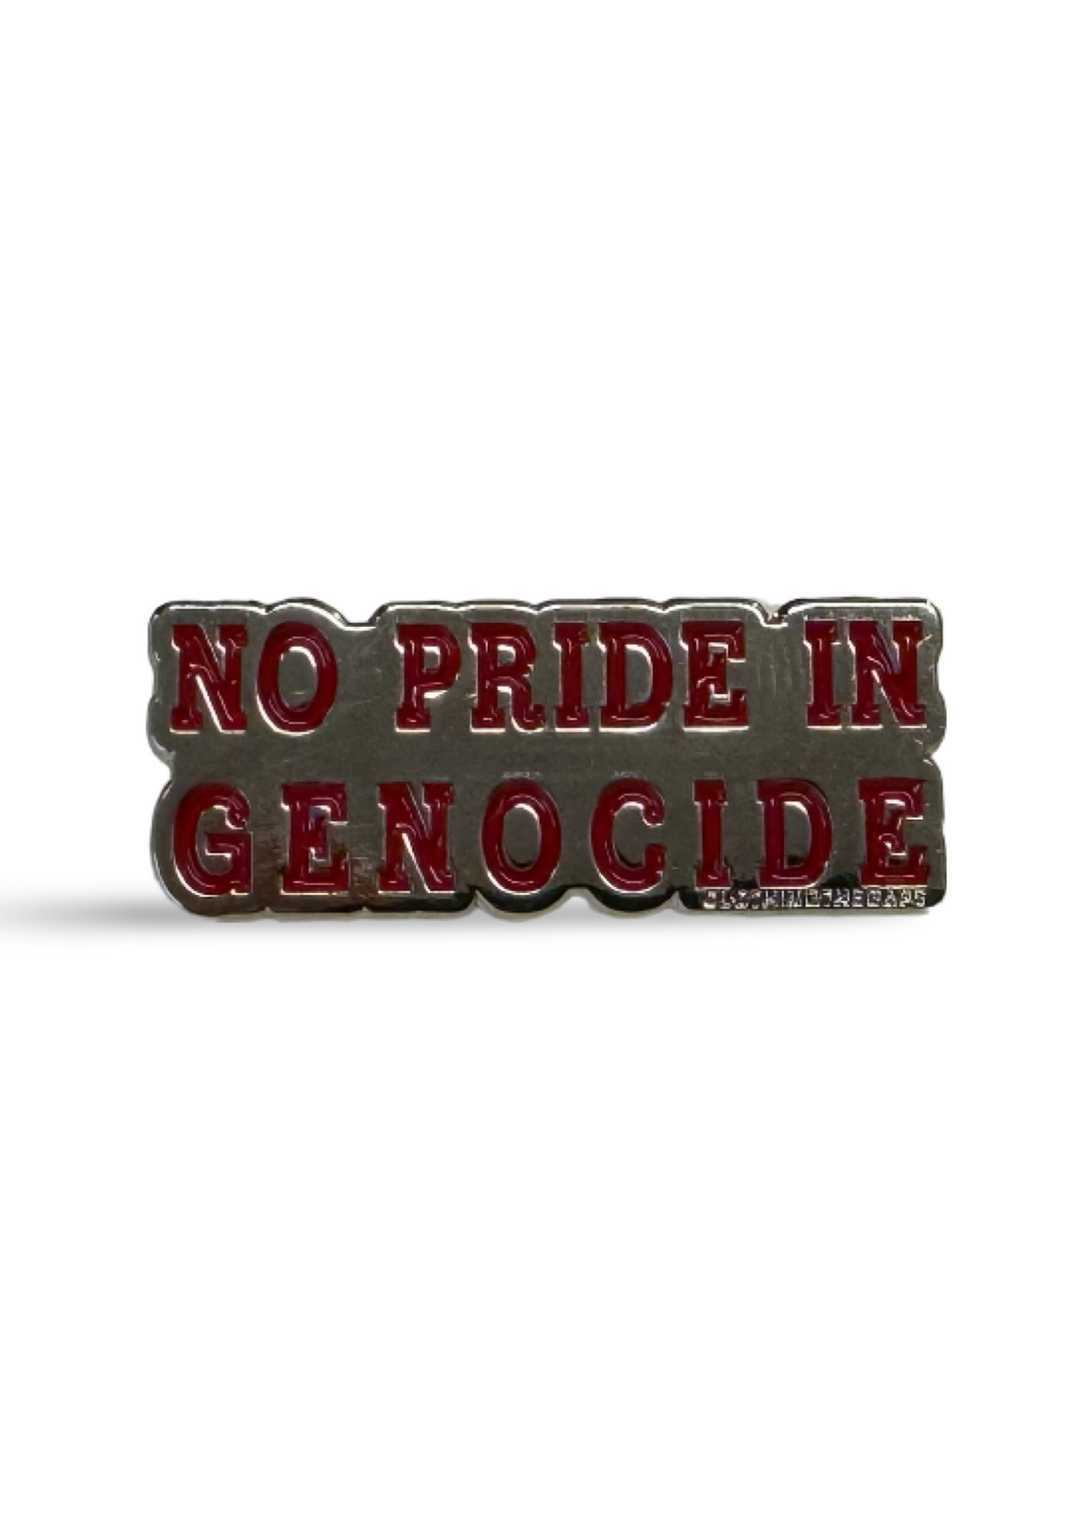 No pride in genocide pin clothing the gaps